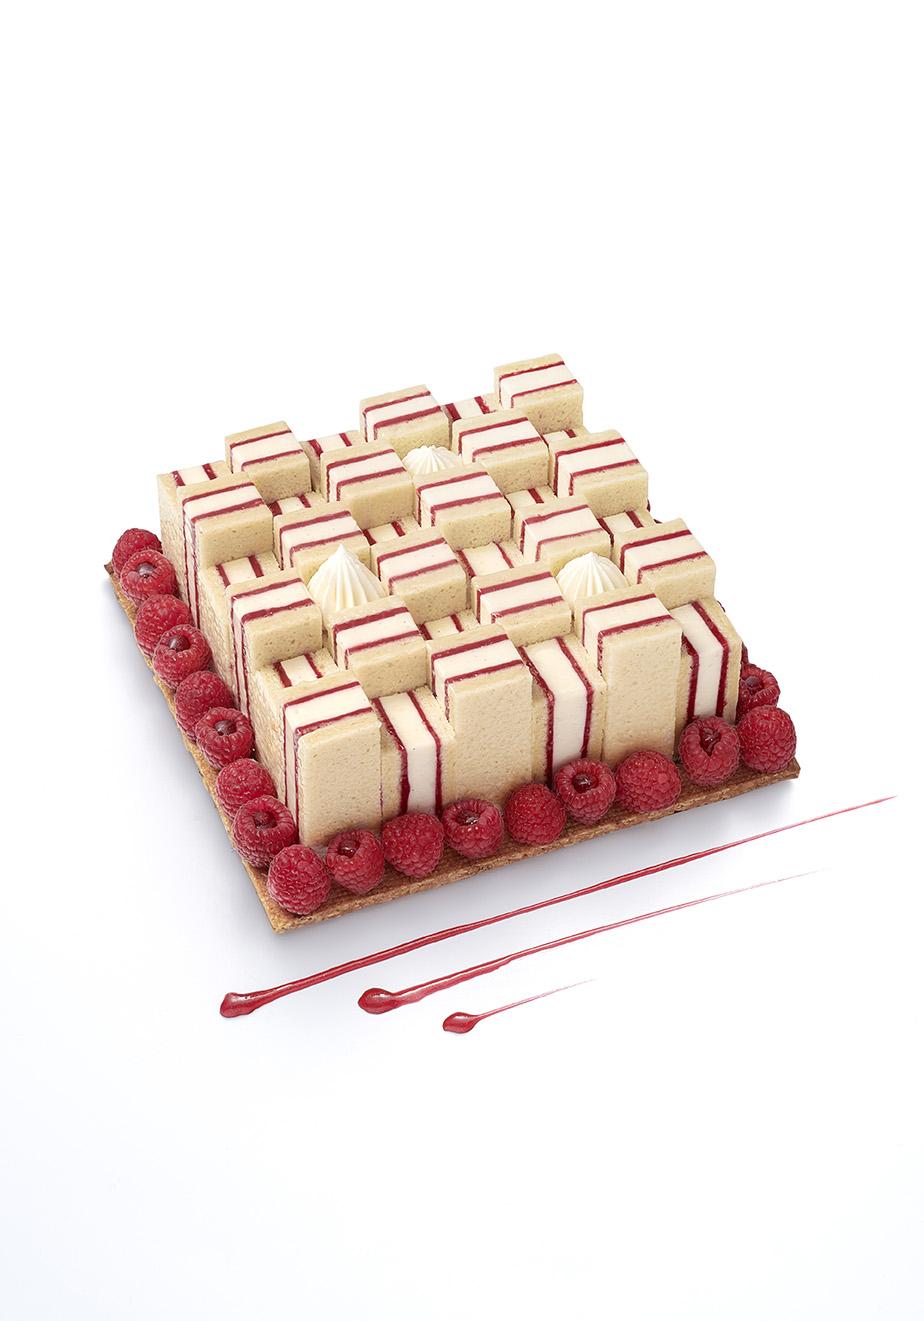 RASPBERRY CAKE 2.0 - Pastry and bakery - Elle & Vire Professionnel